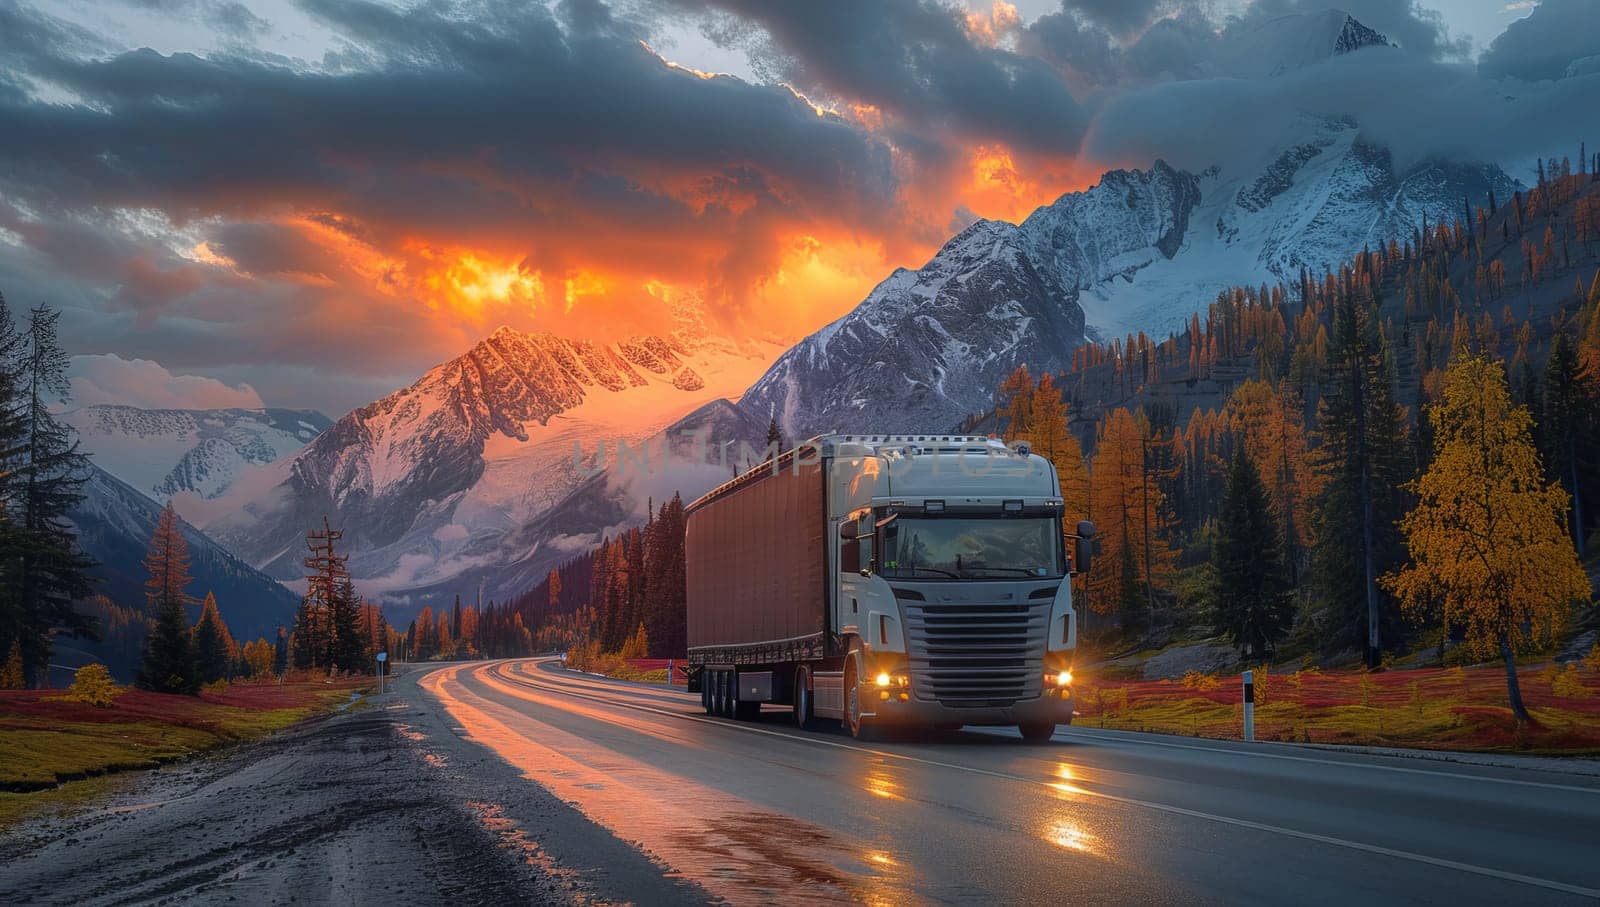 Truck traversing mountainous terrain during a picturesque sunset by ailike